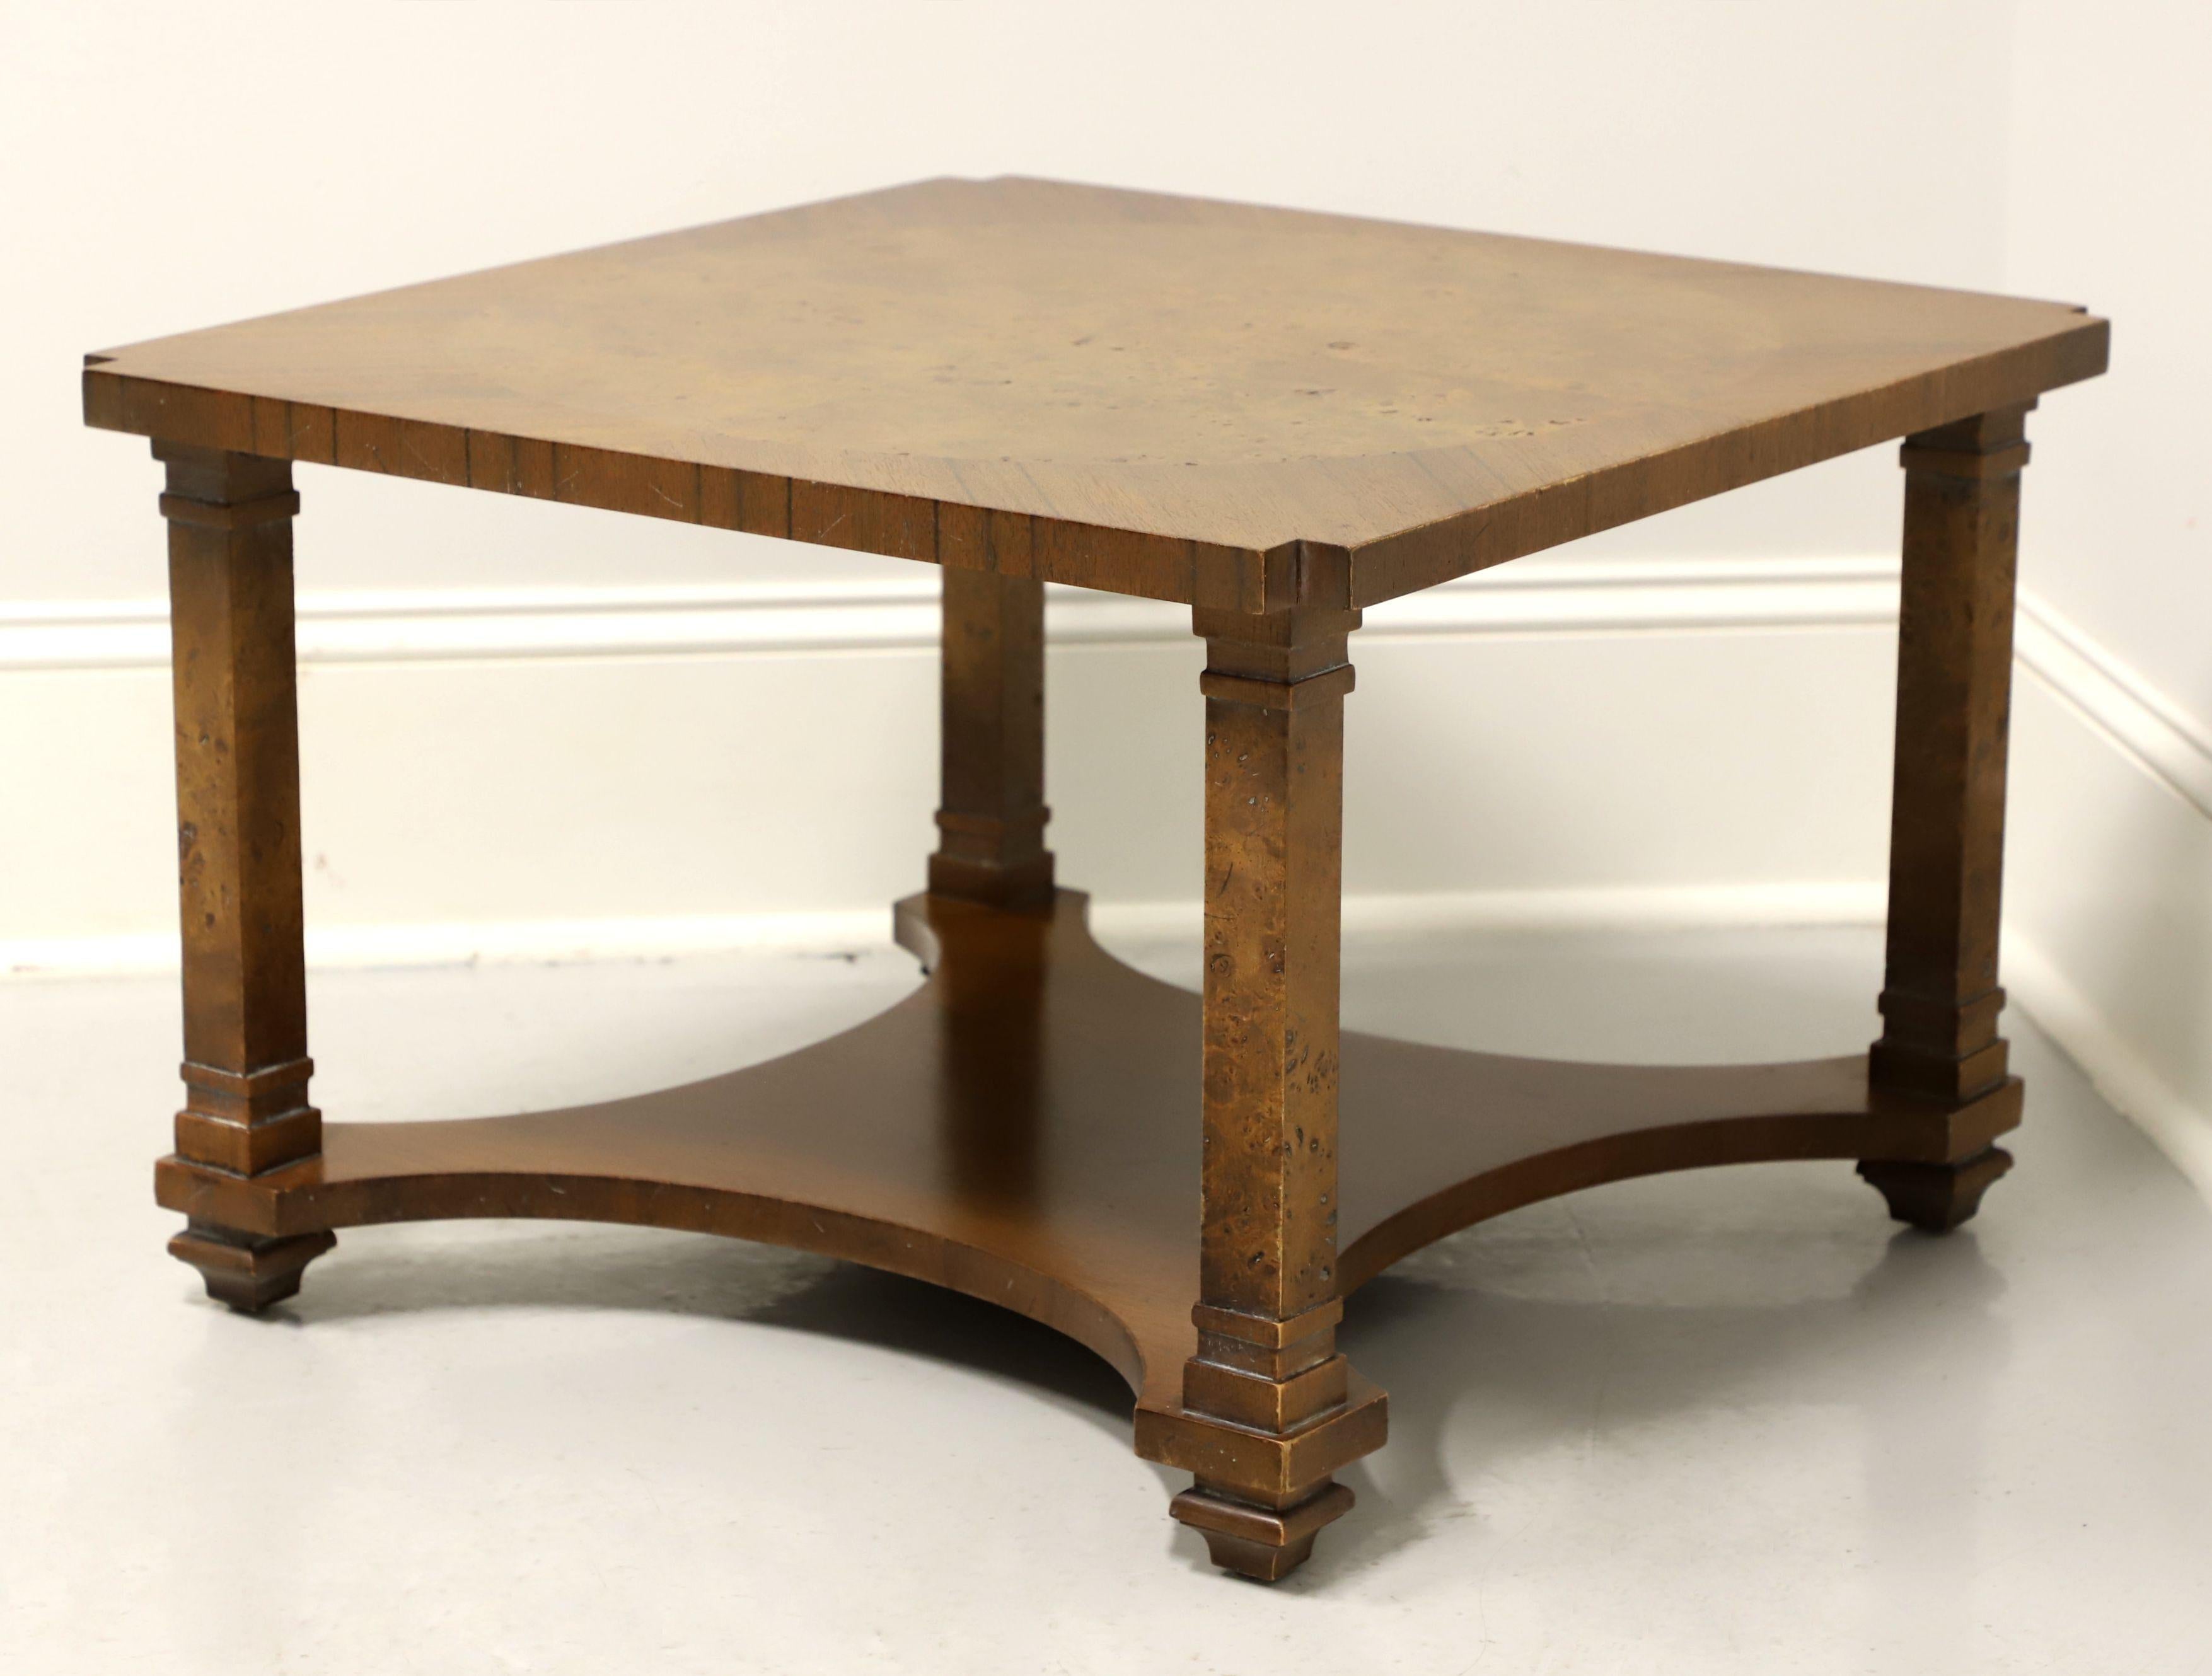 American TOMLINSON 1960's Walnut Neoclassical Square Cocktail Table with Undertier Shelf